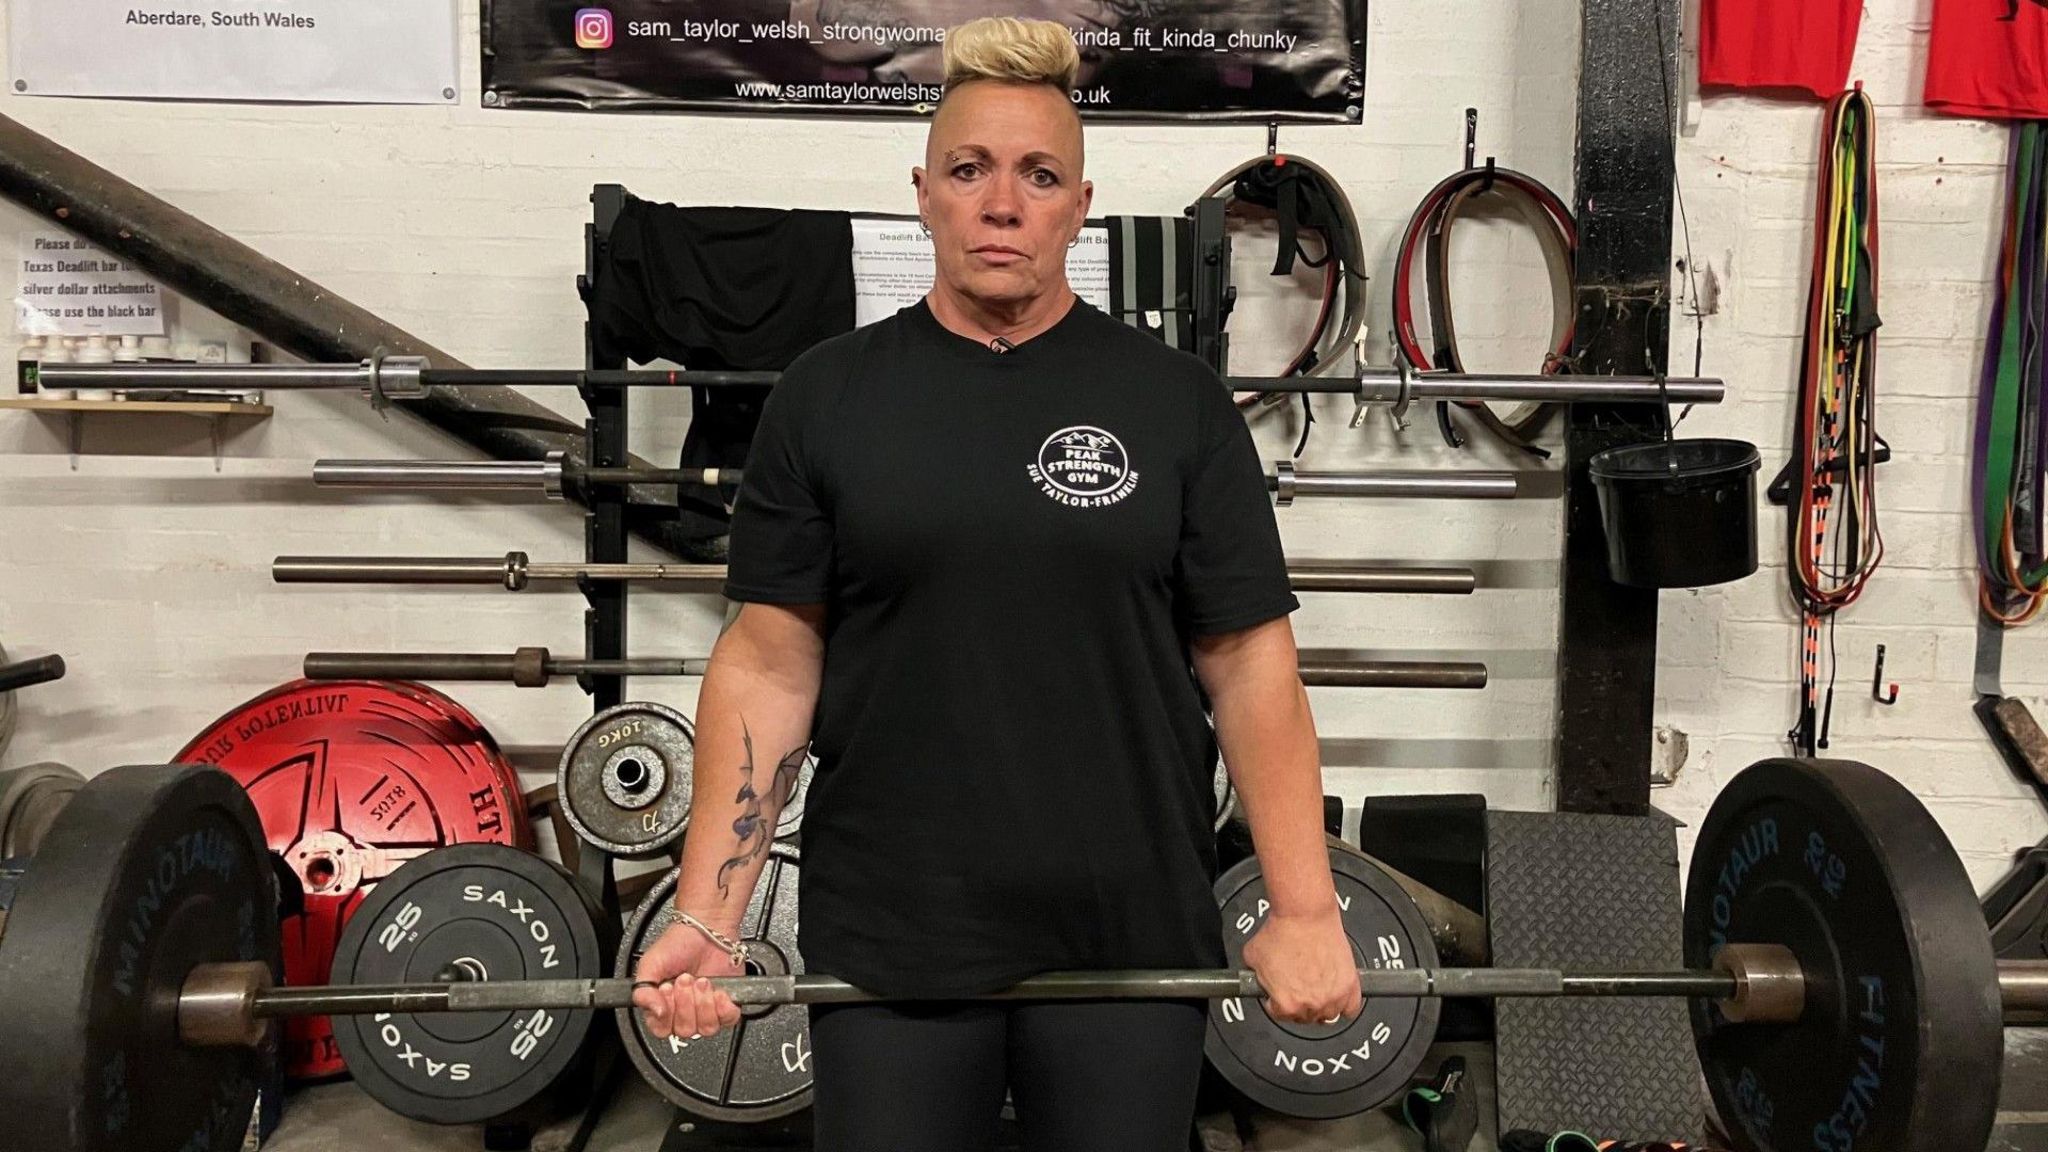 Sue Taylor-Franklin deadlifting weights in the gym